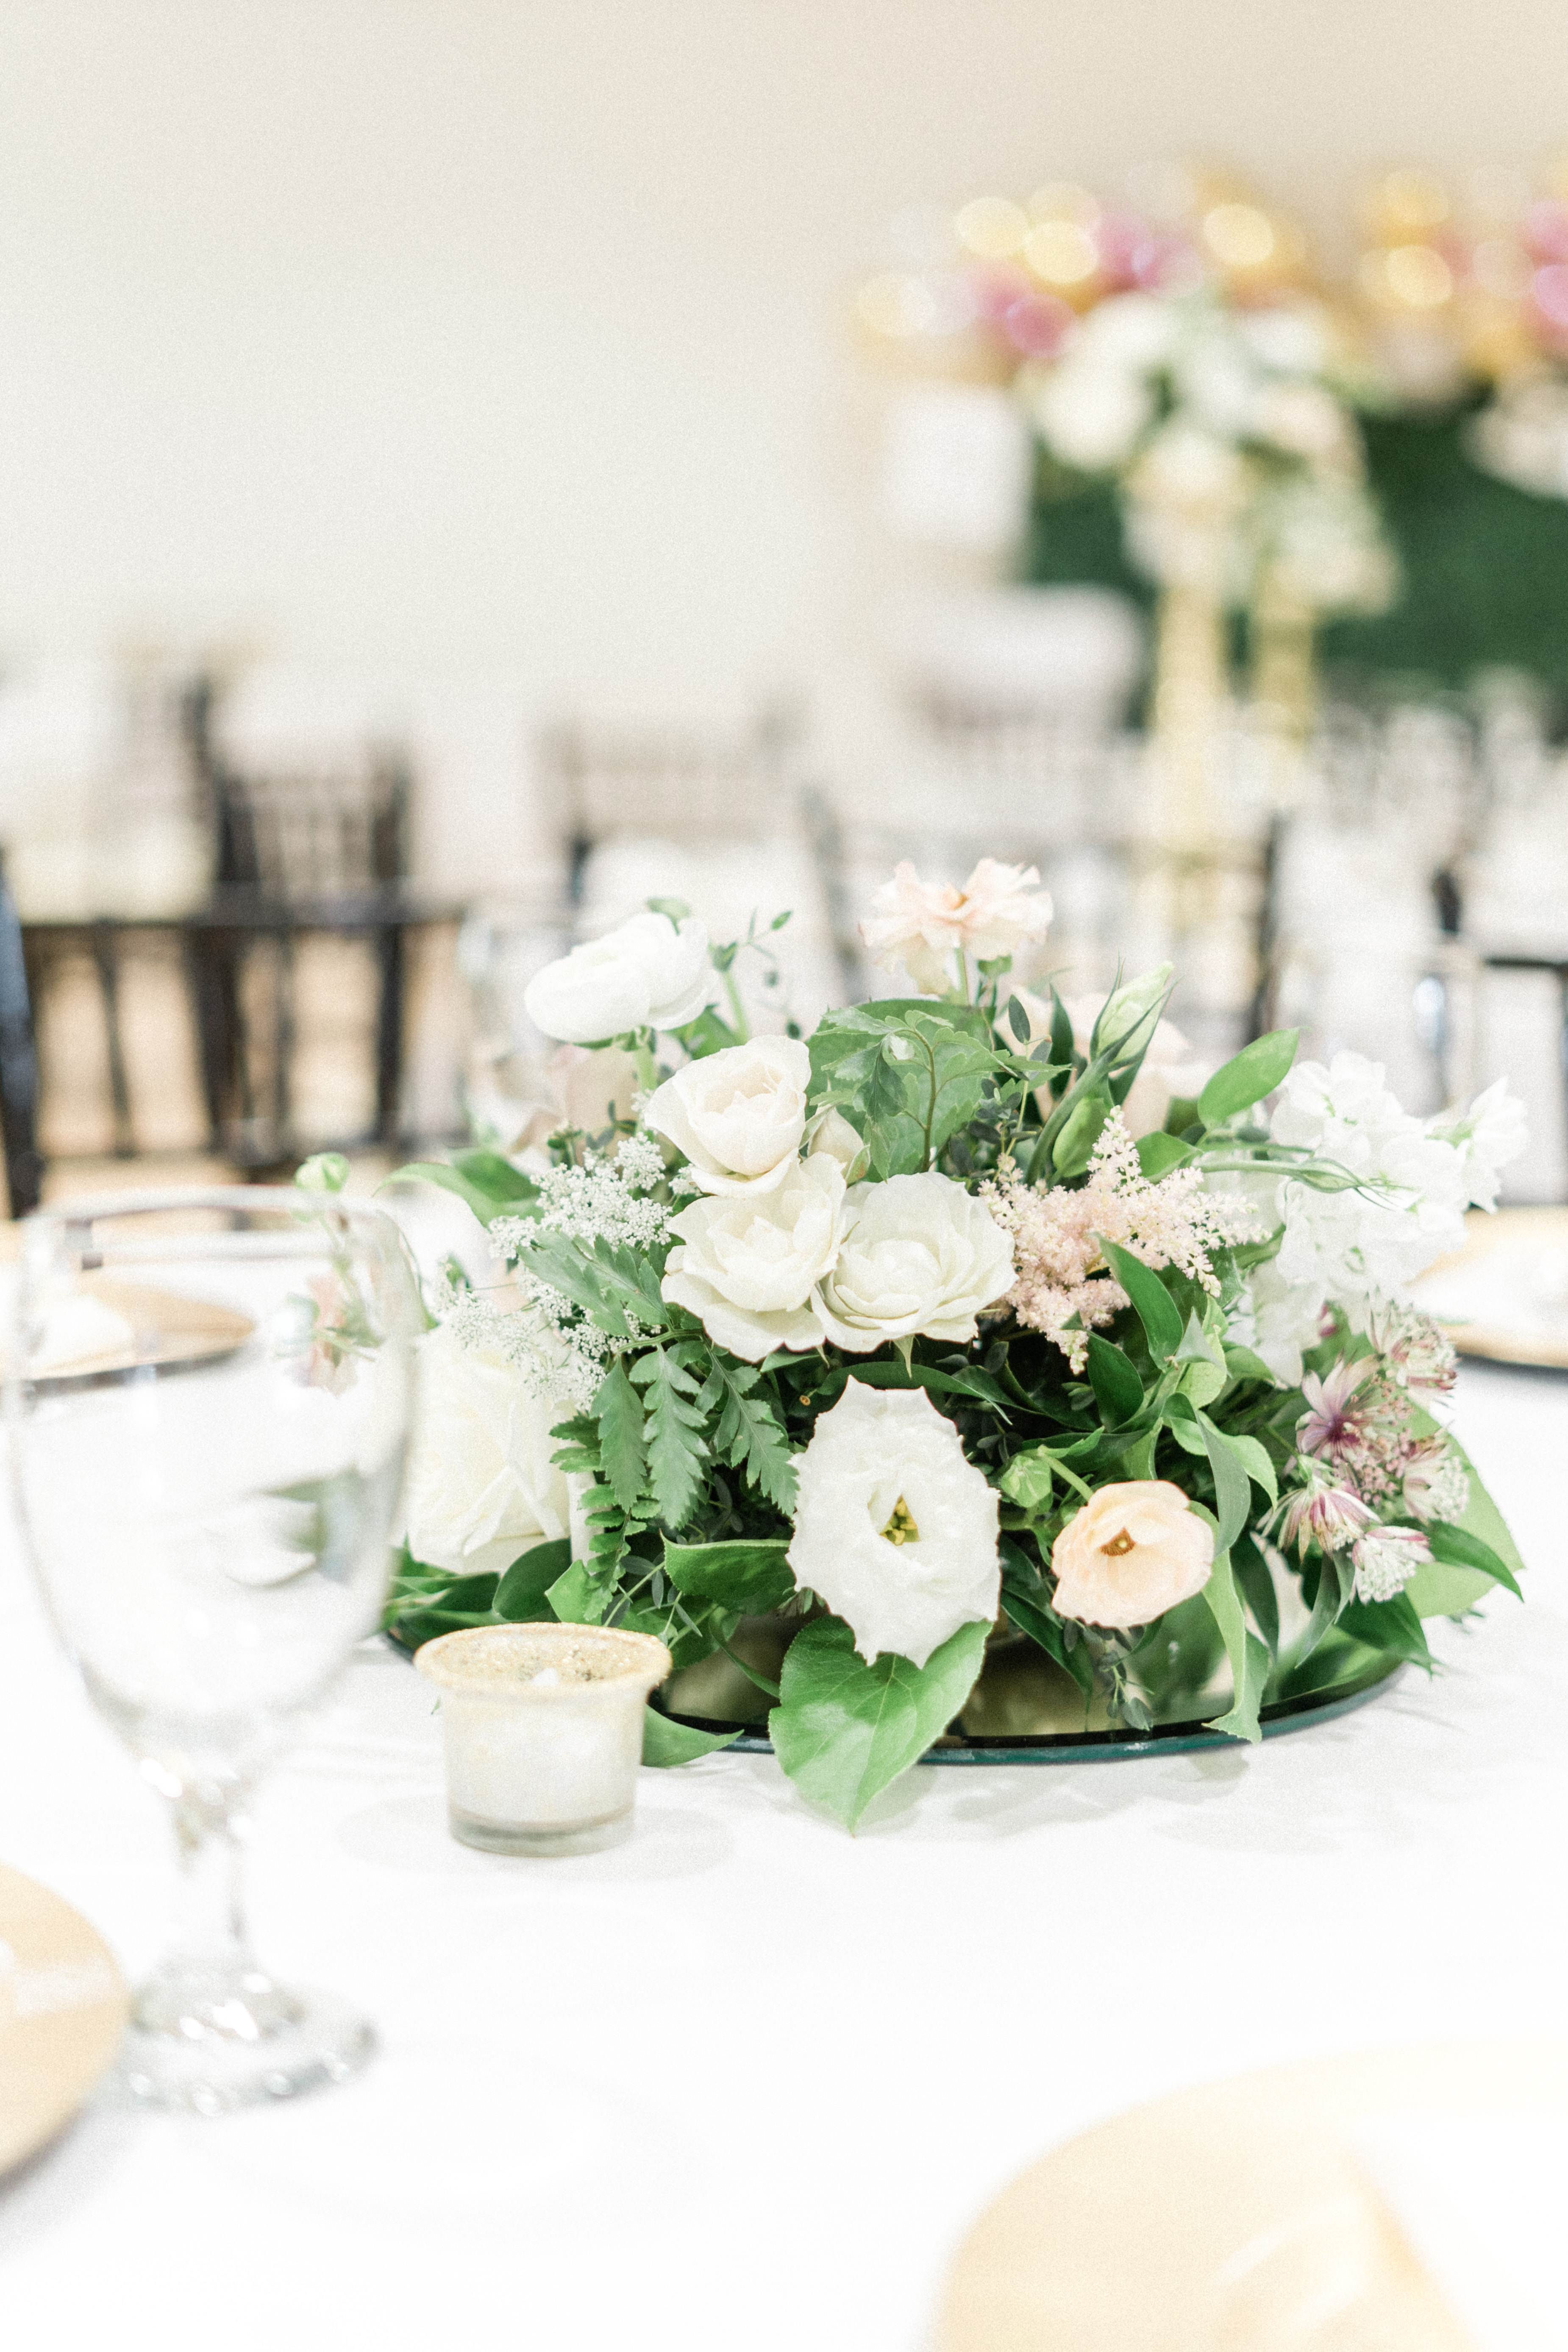 Elegant floral centerpiece at a wedding reception at the Stagecoach Inn in Salado, Texas.